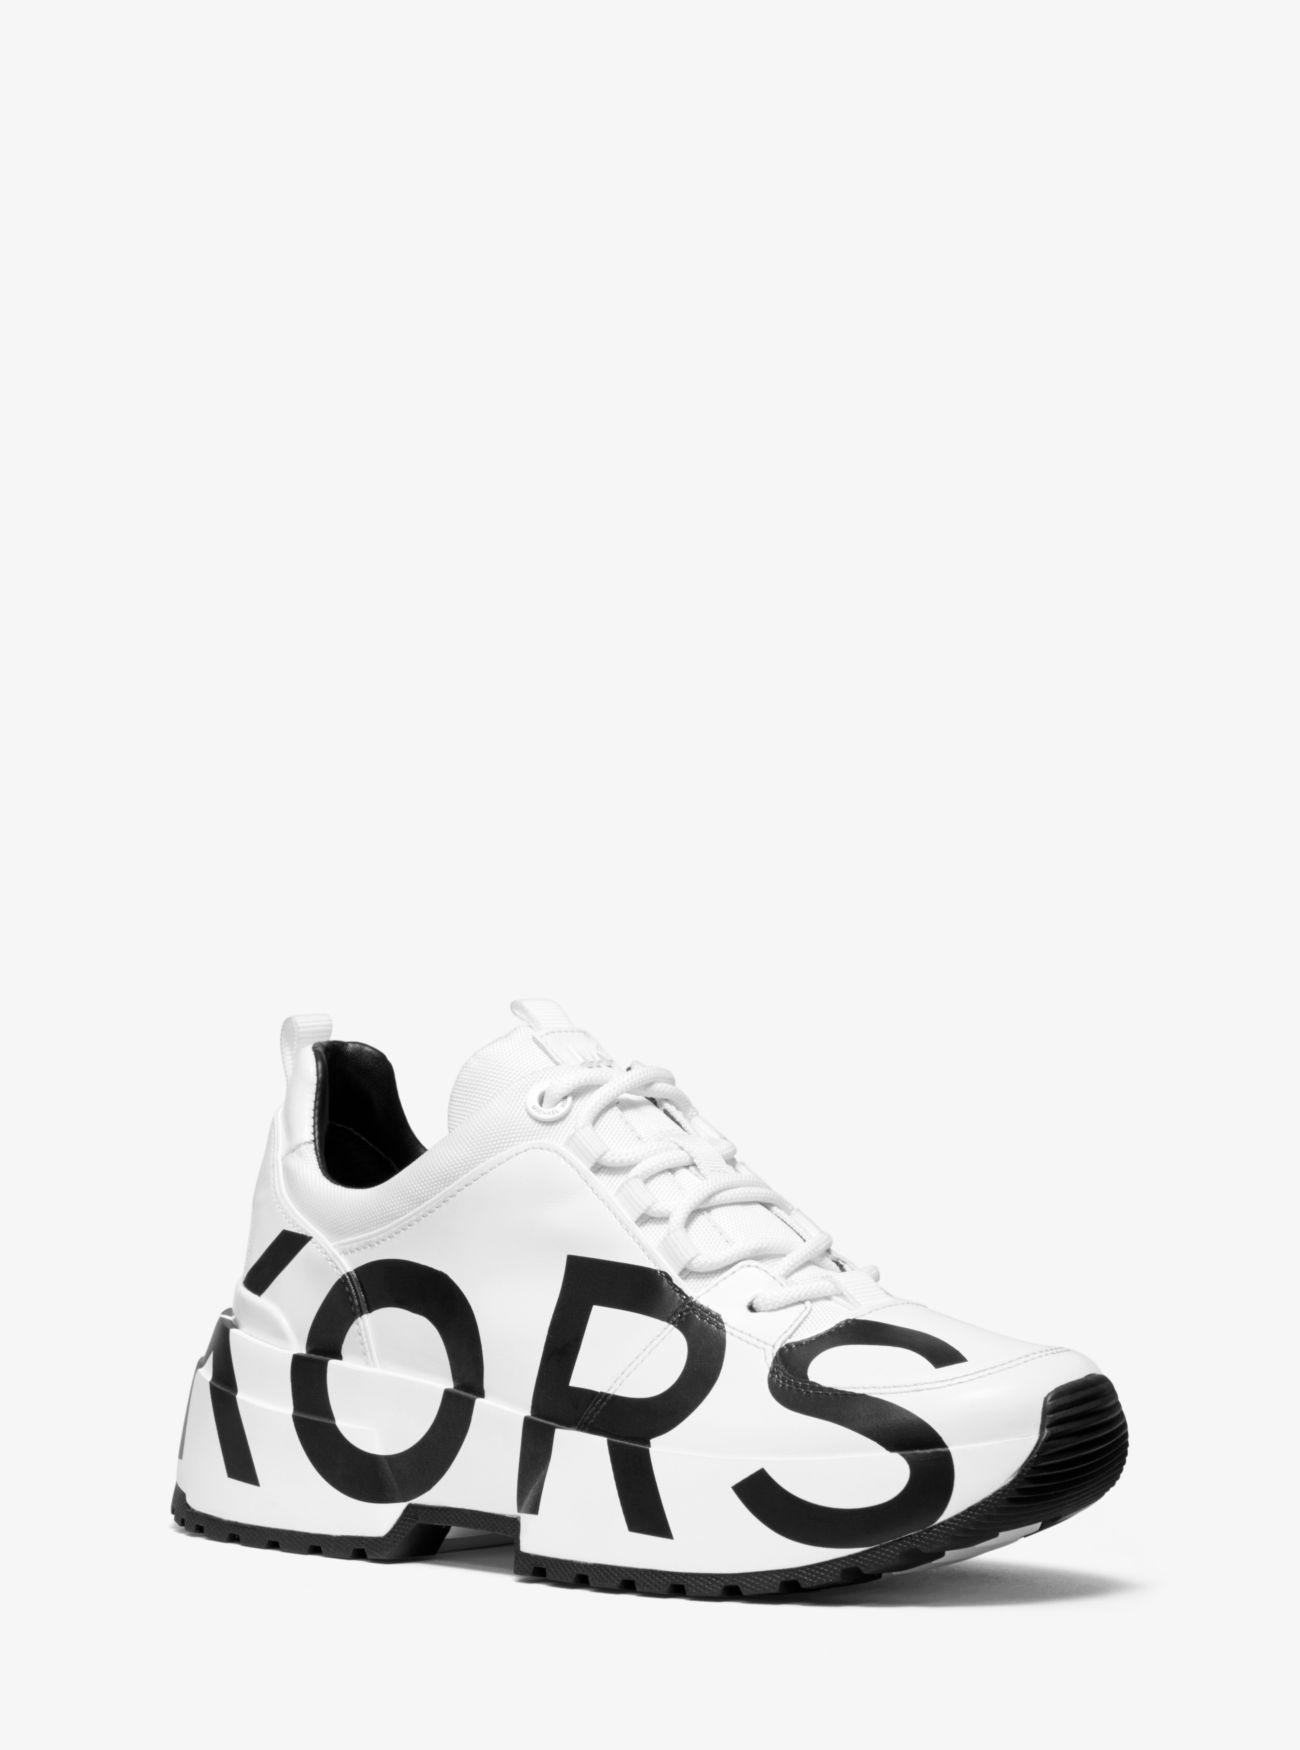 michael kors black and white trainers